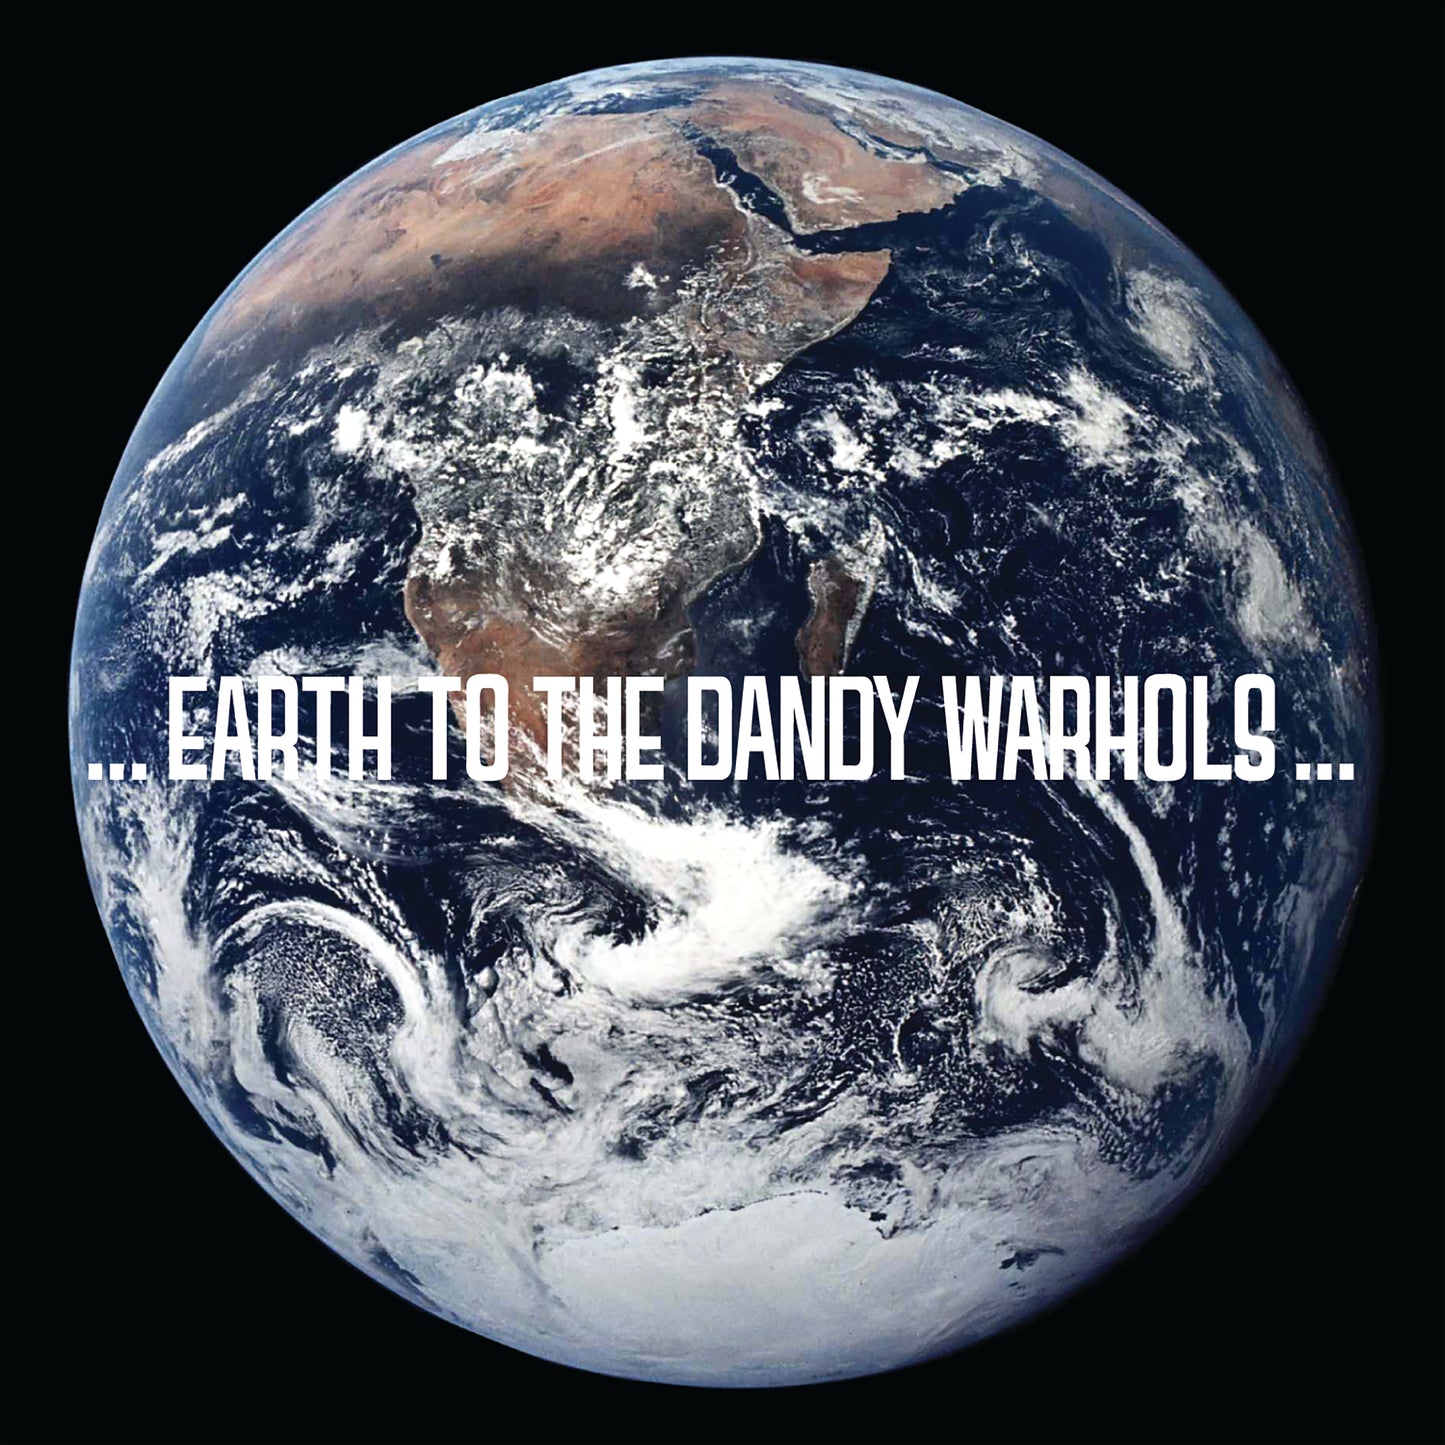 The Dandy Warhols - ...Earth To The Dandy Warhols... (US TOUR EDITION)